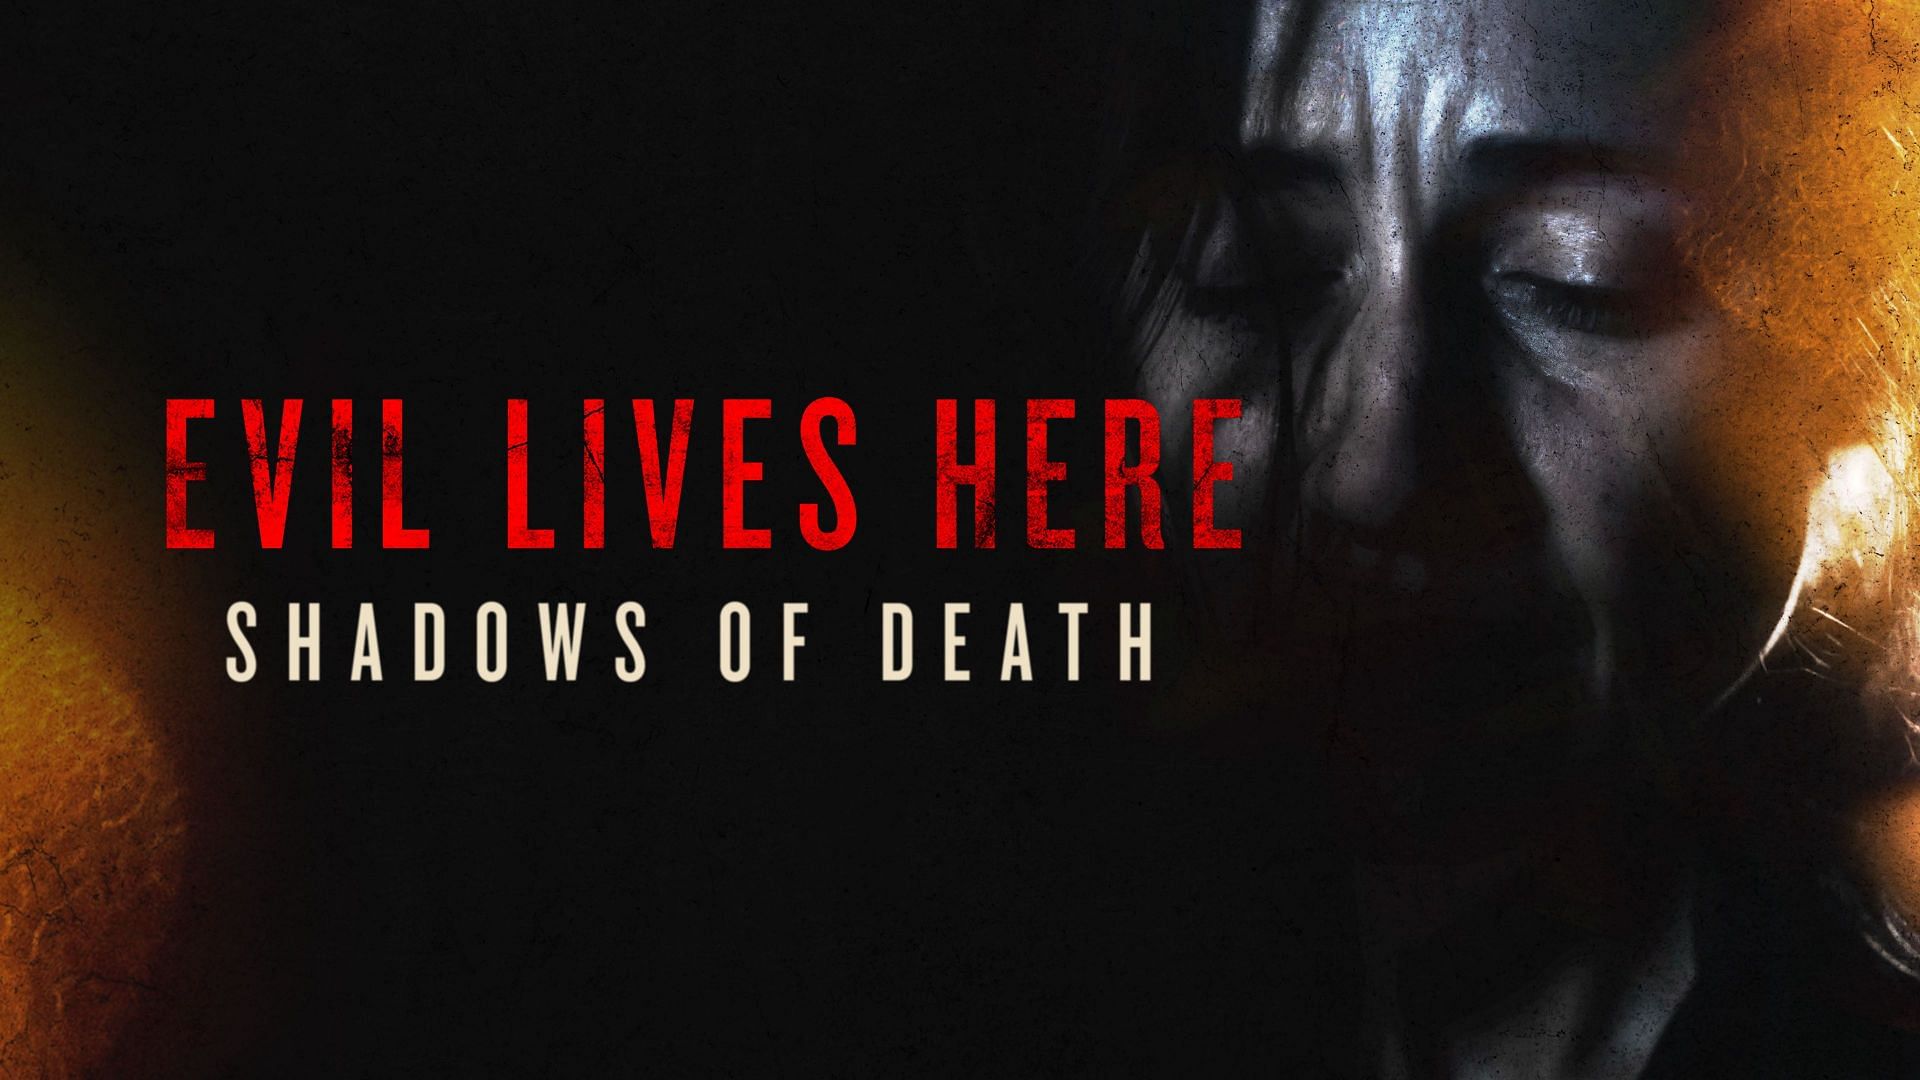 Evil Lives Here Season 13 is currently being re-aired. (Image via Investigation Discovery)